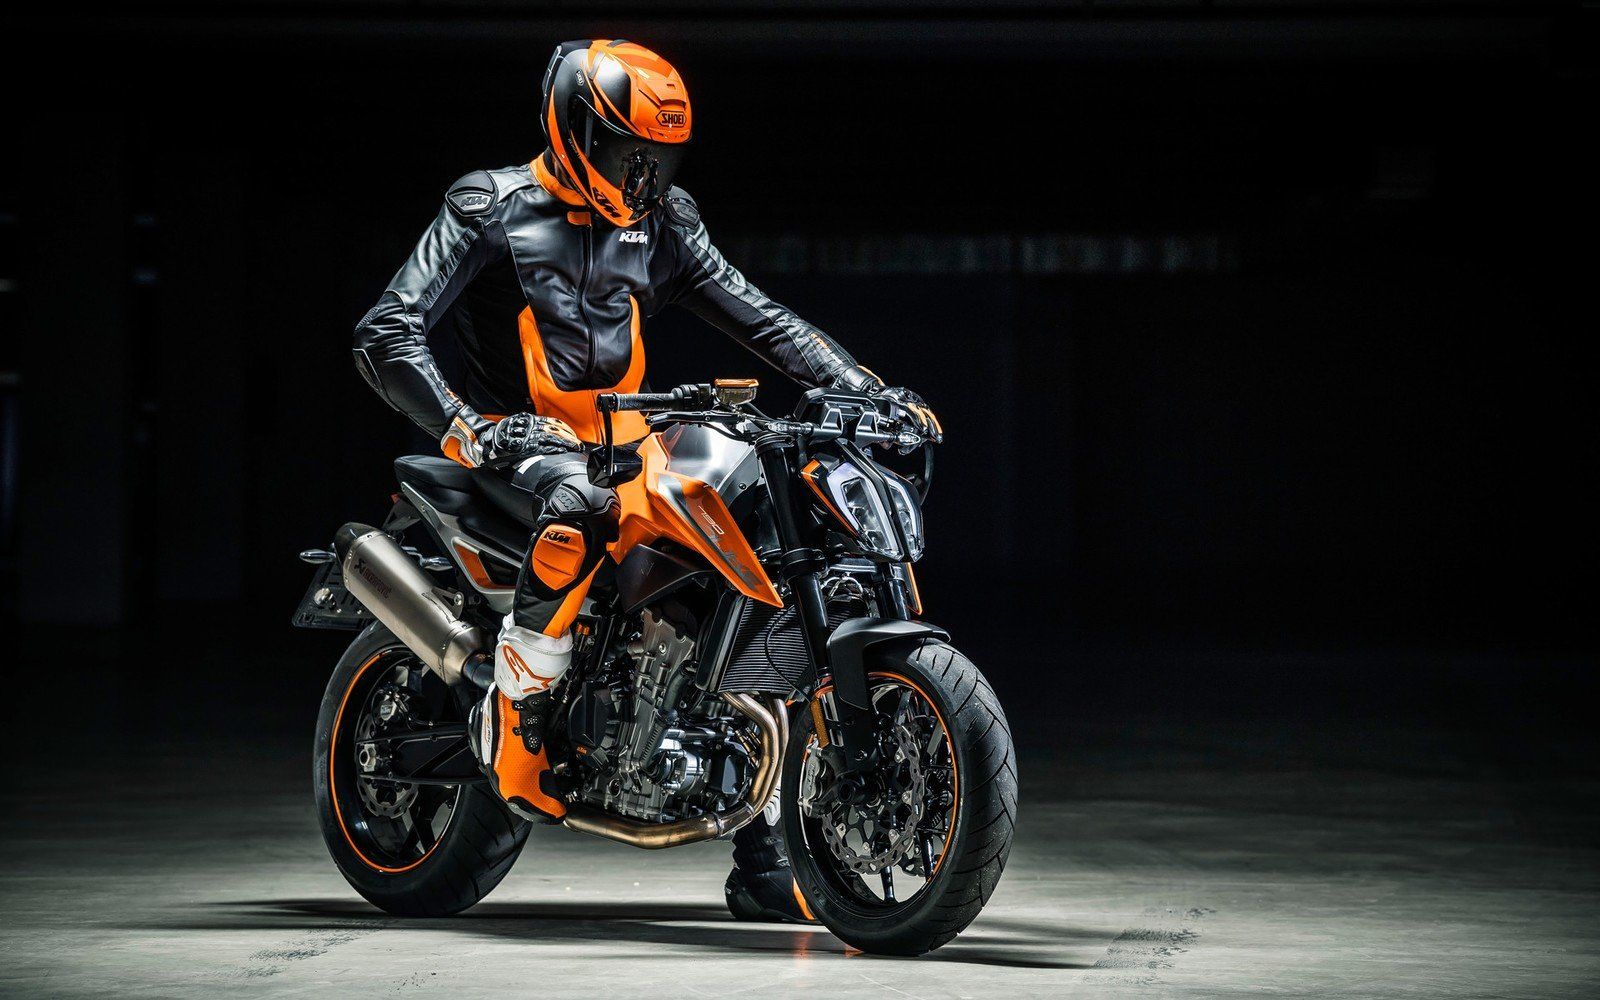 Gallery: 2018 KTM Duke 790 The Details Picture, Photo, Wallpaper And Videos